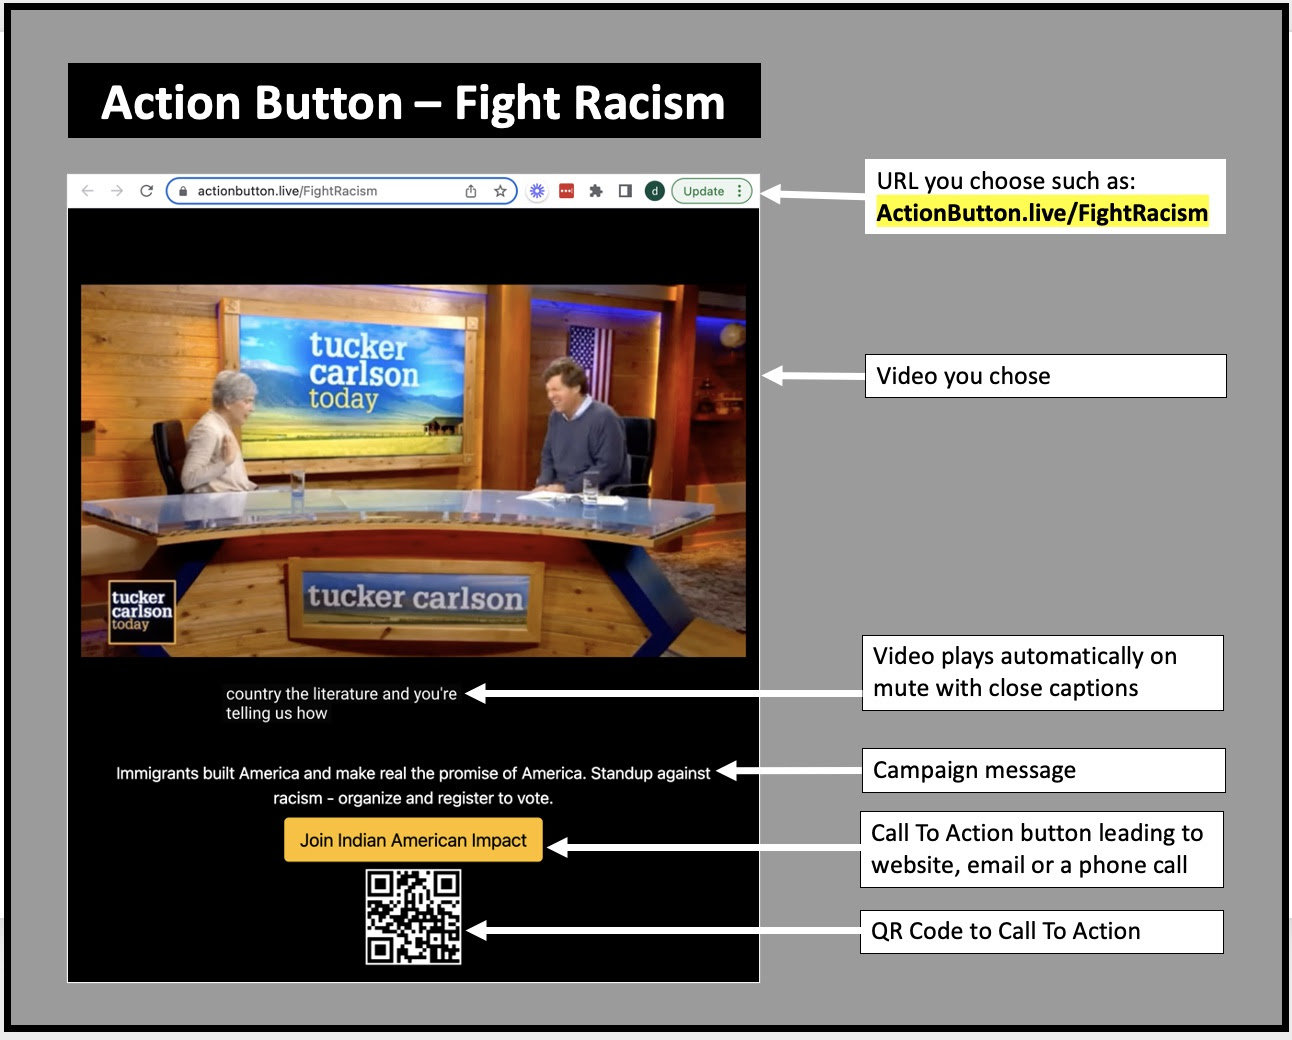 Action Buttons combine a video, campaign message and call to action in one link.